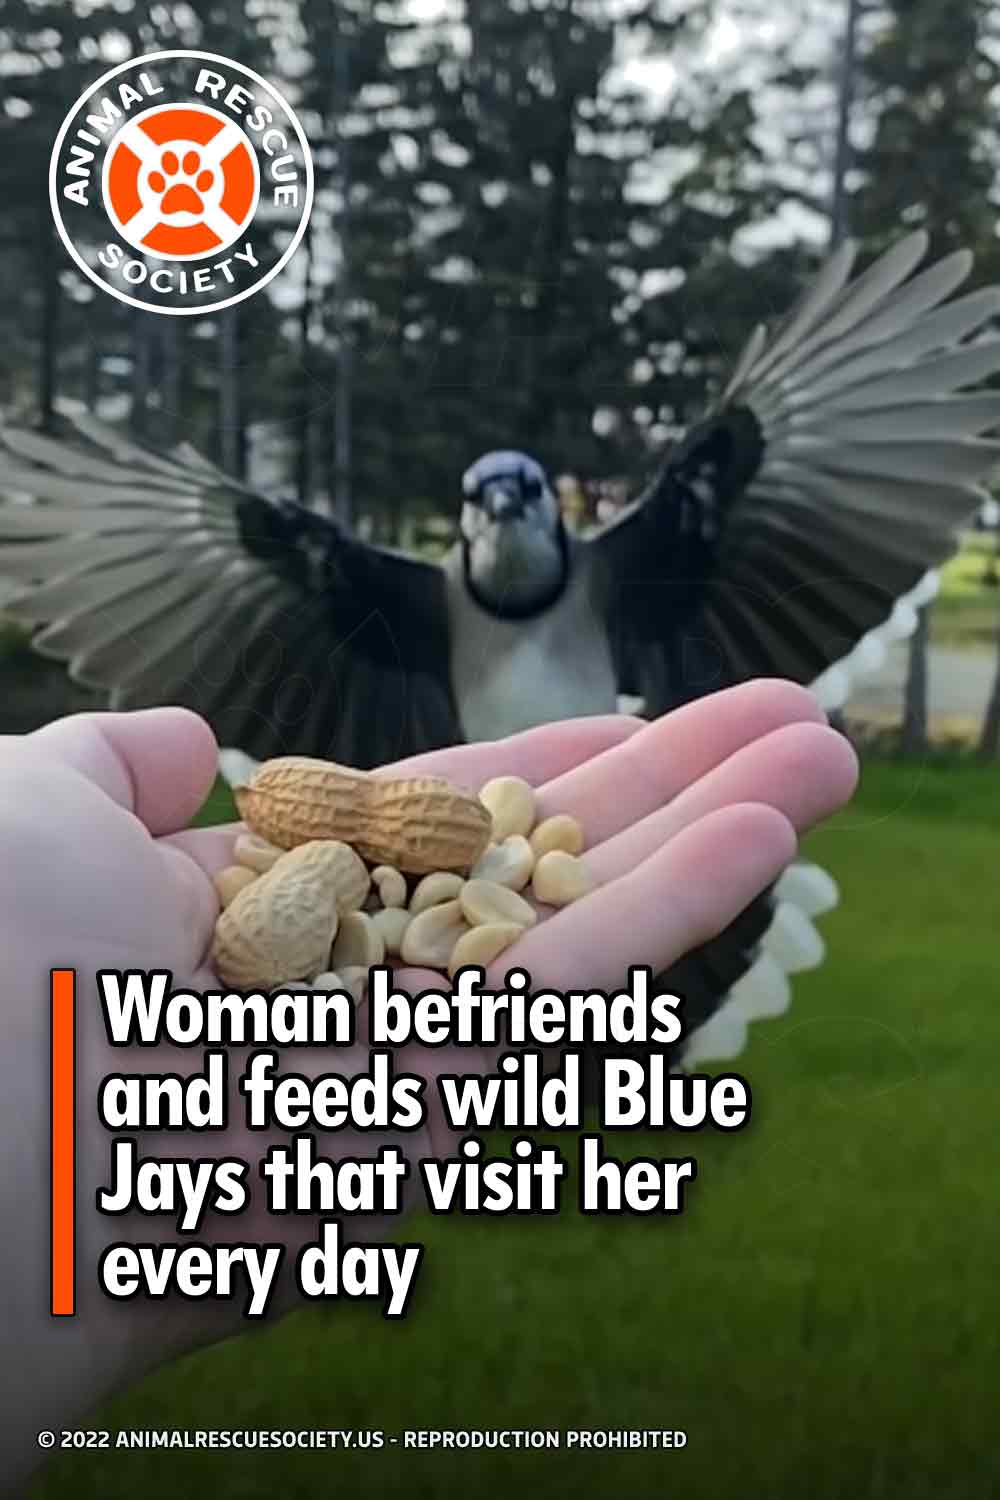 Woman befriends and feeds wild Blue Jays that visit her every day